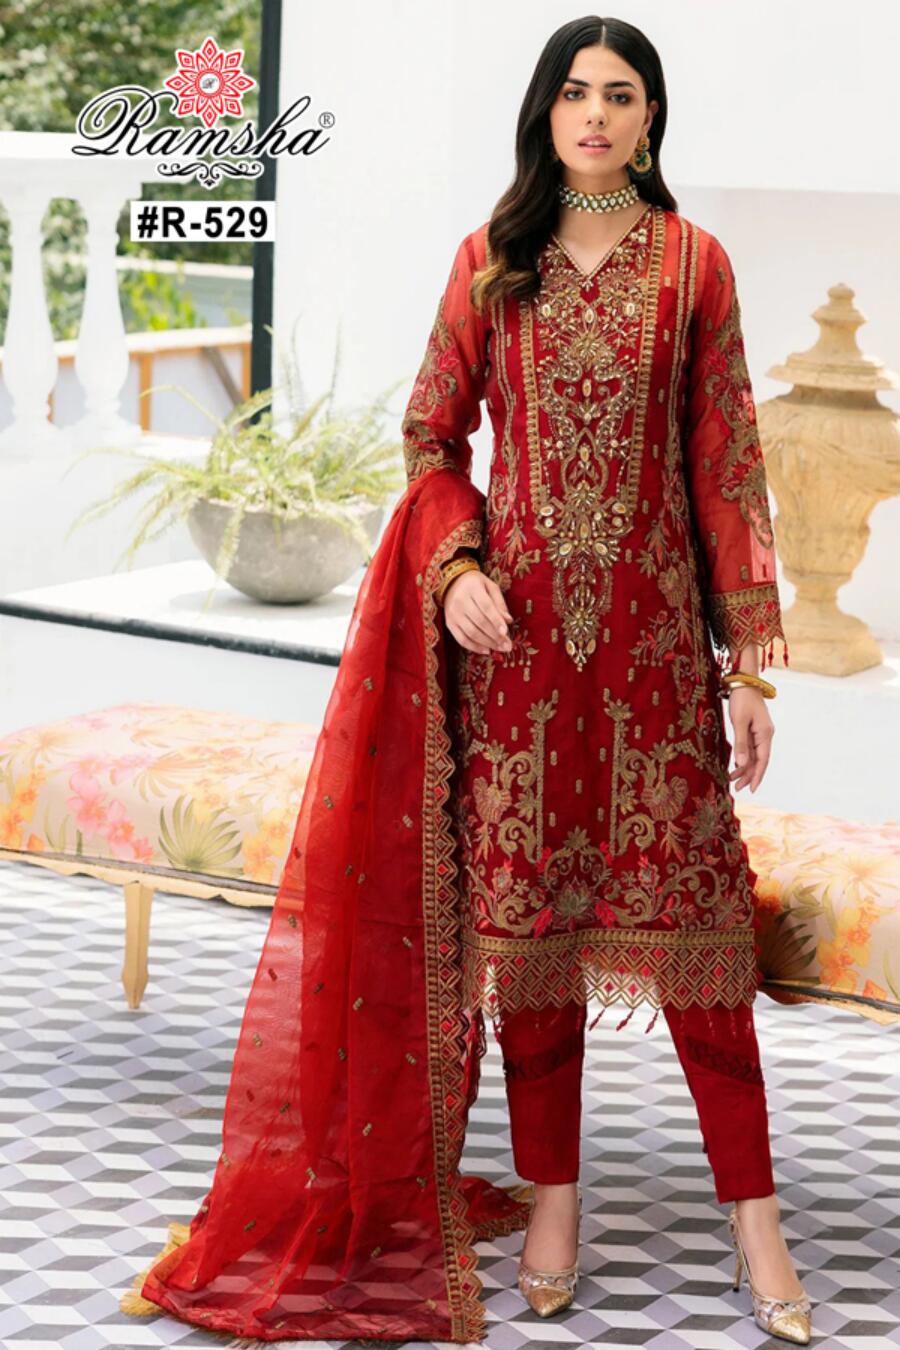 Ramsha Fashion R 529 Pakistani Suits in Red Colour